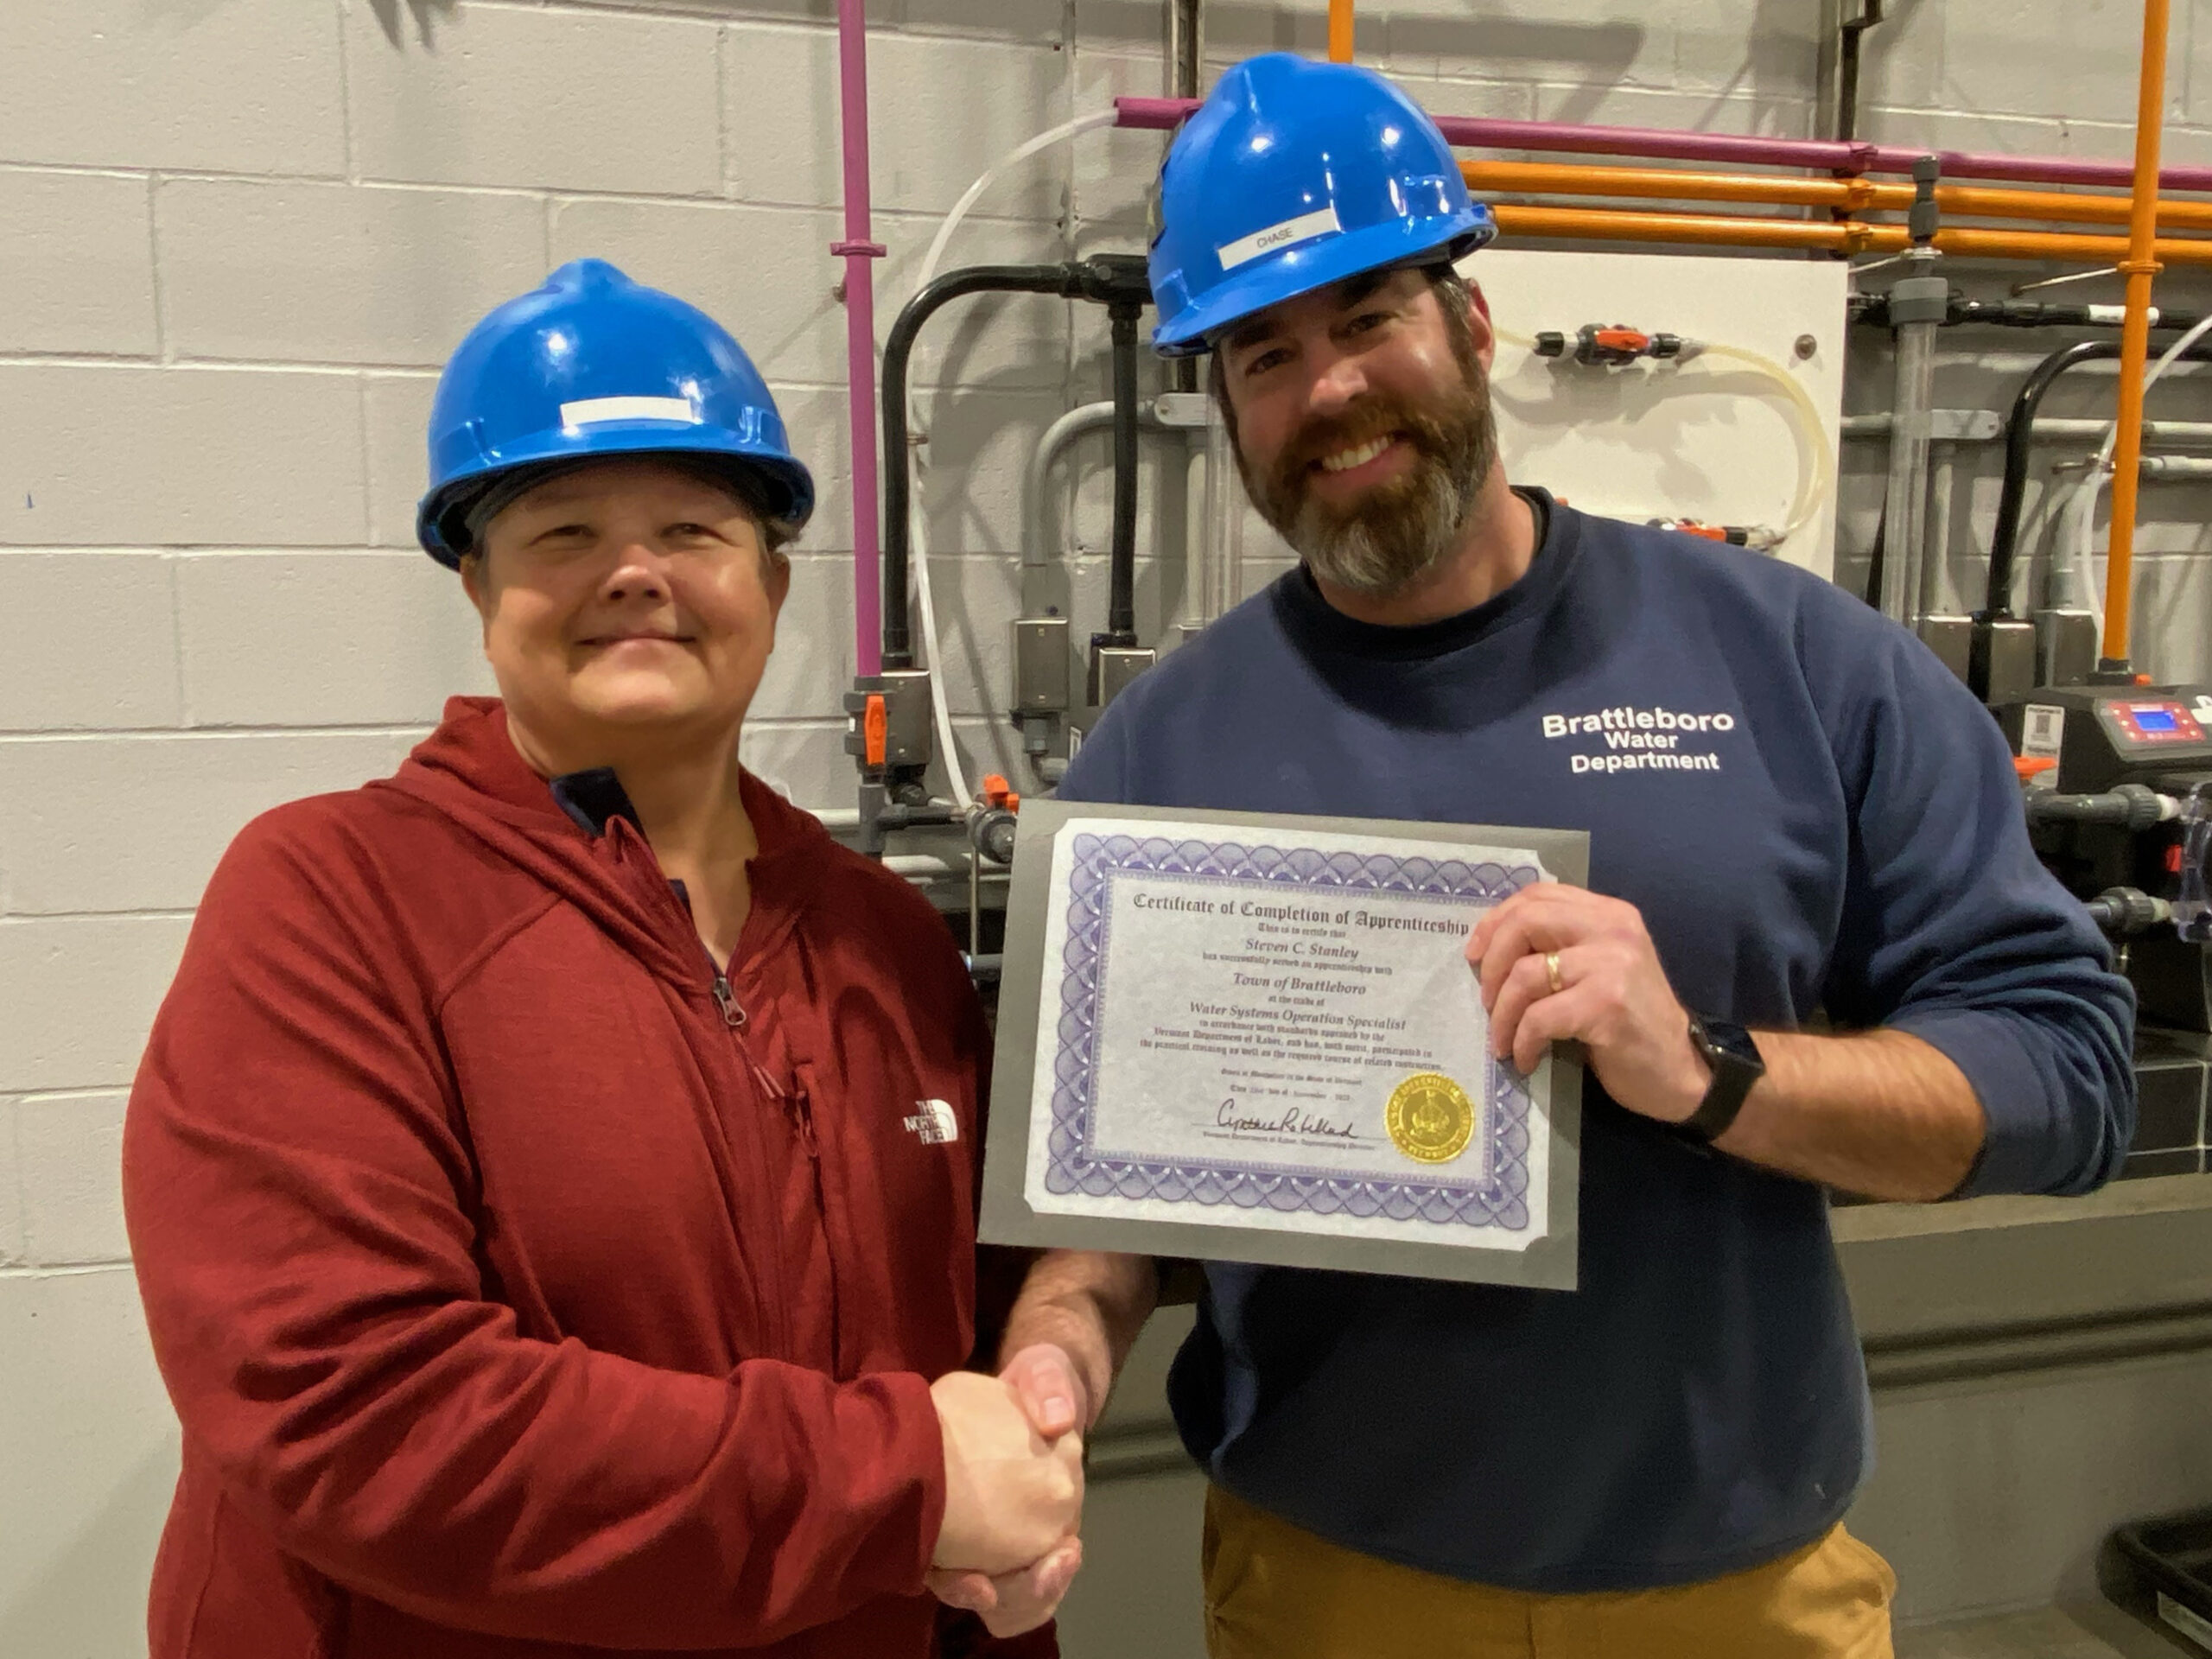 A man and a woman shake hands. Both are wearing blue hard hats. The man is holding a certificate.